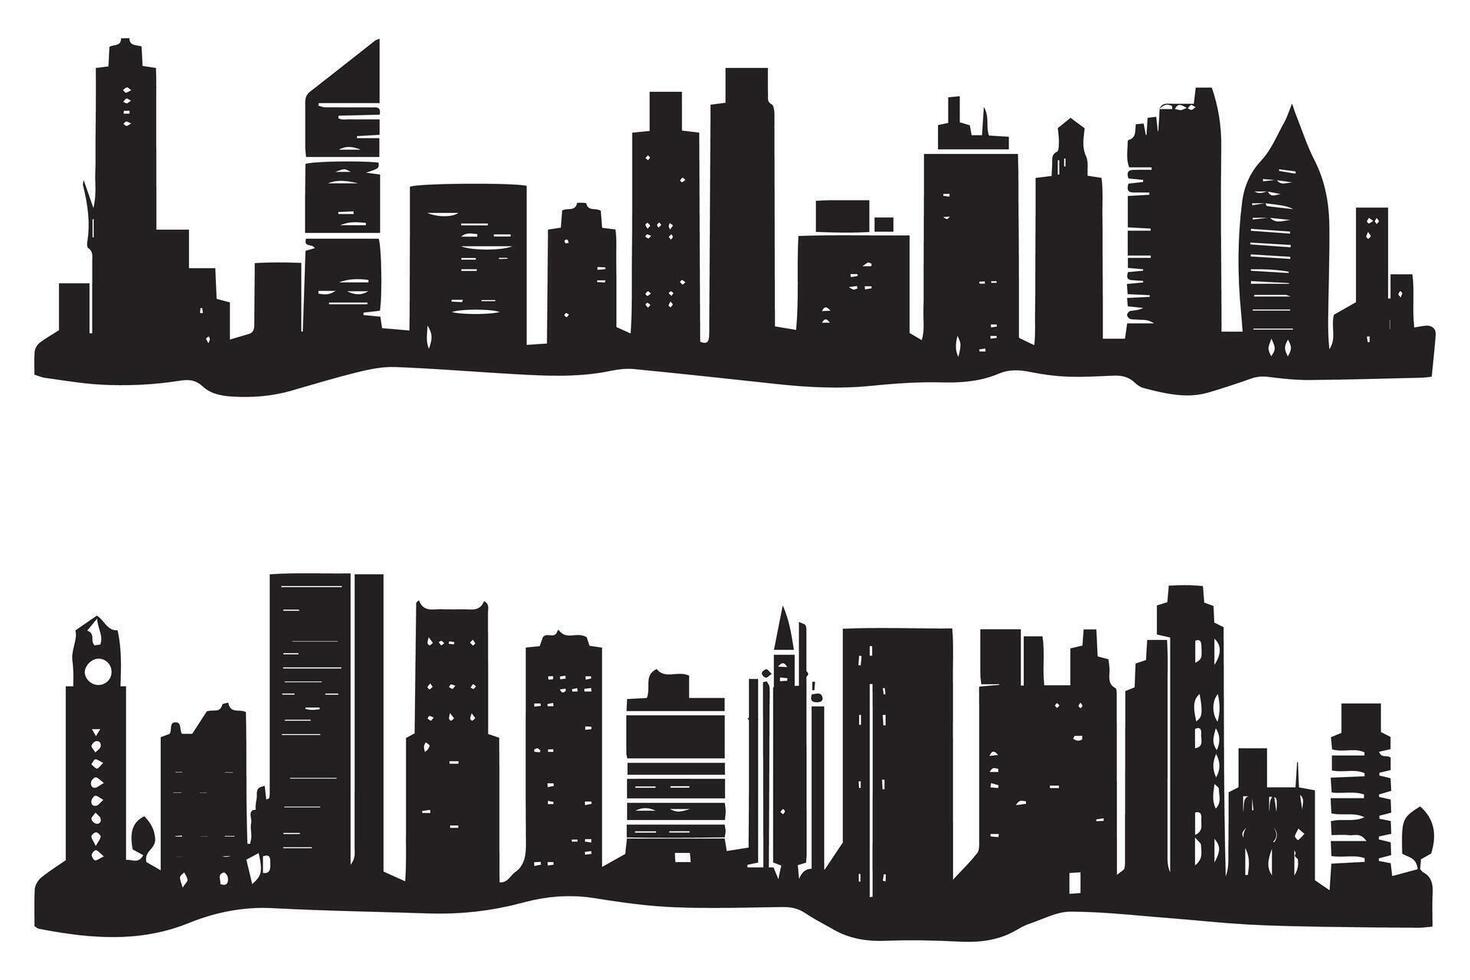 City skylines silhouette, cityscape set, black isolated on white background free design vector